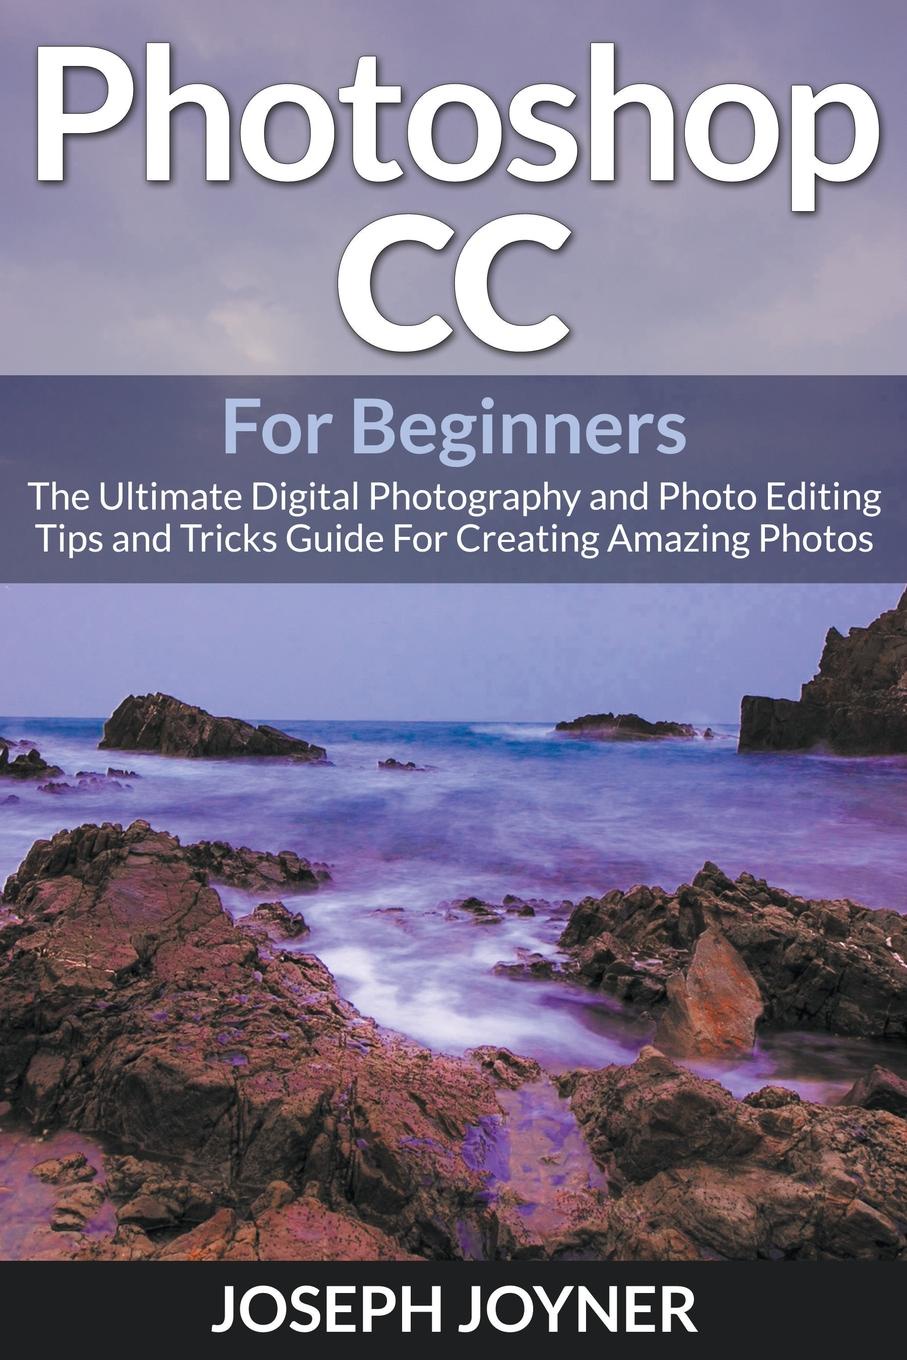 фото Photoshop CC For Beginners. The Ultimate Digital Photography and Photo Editing Tips and Tricks Guide For Creating Amazing Photos